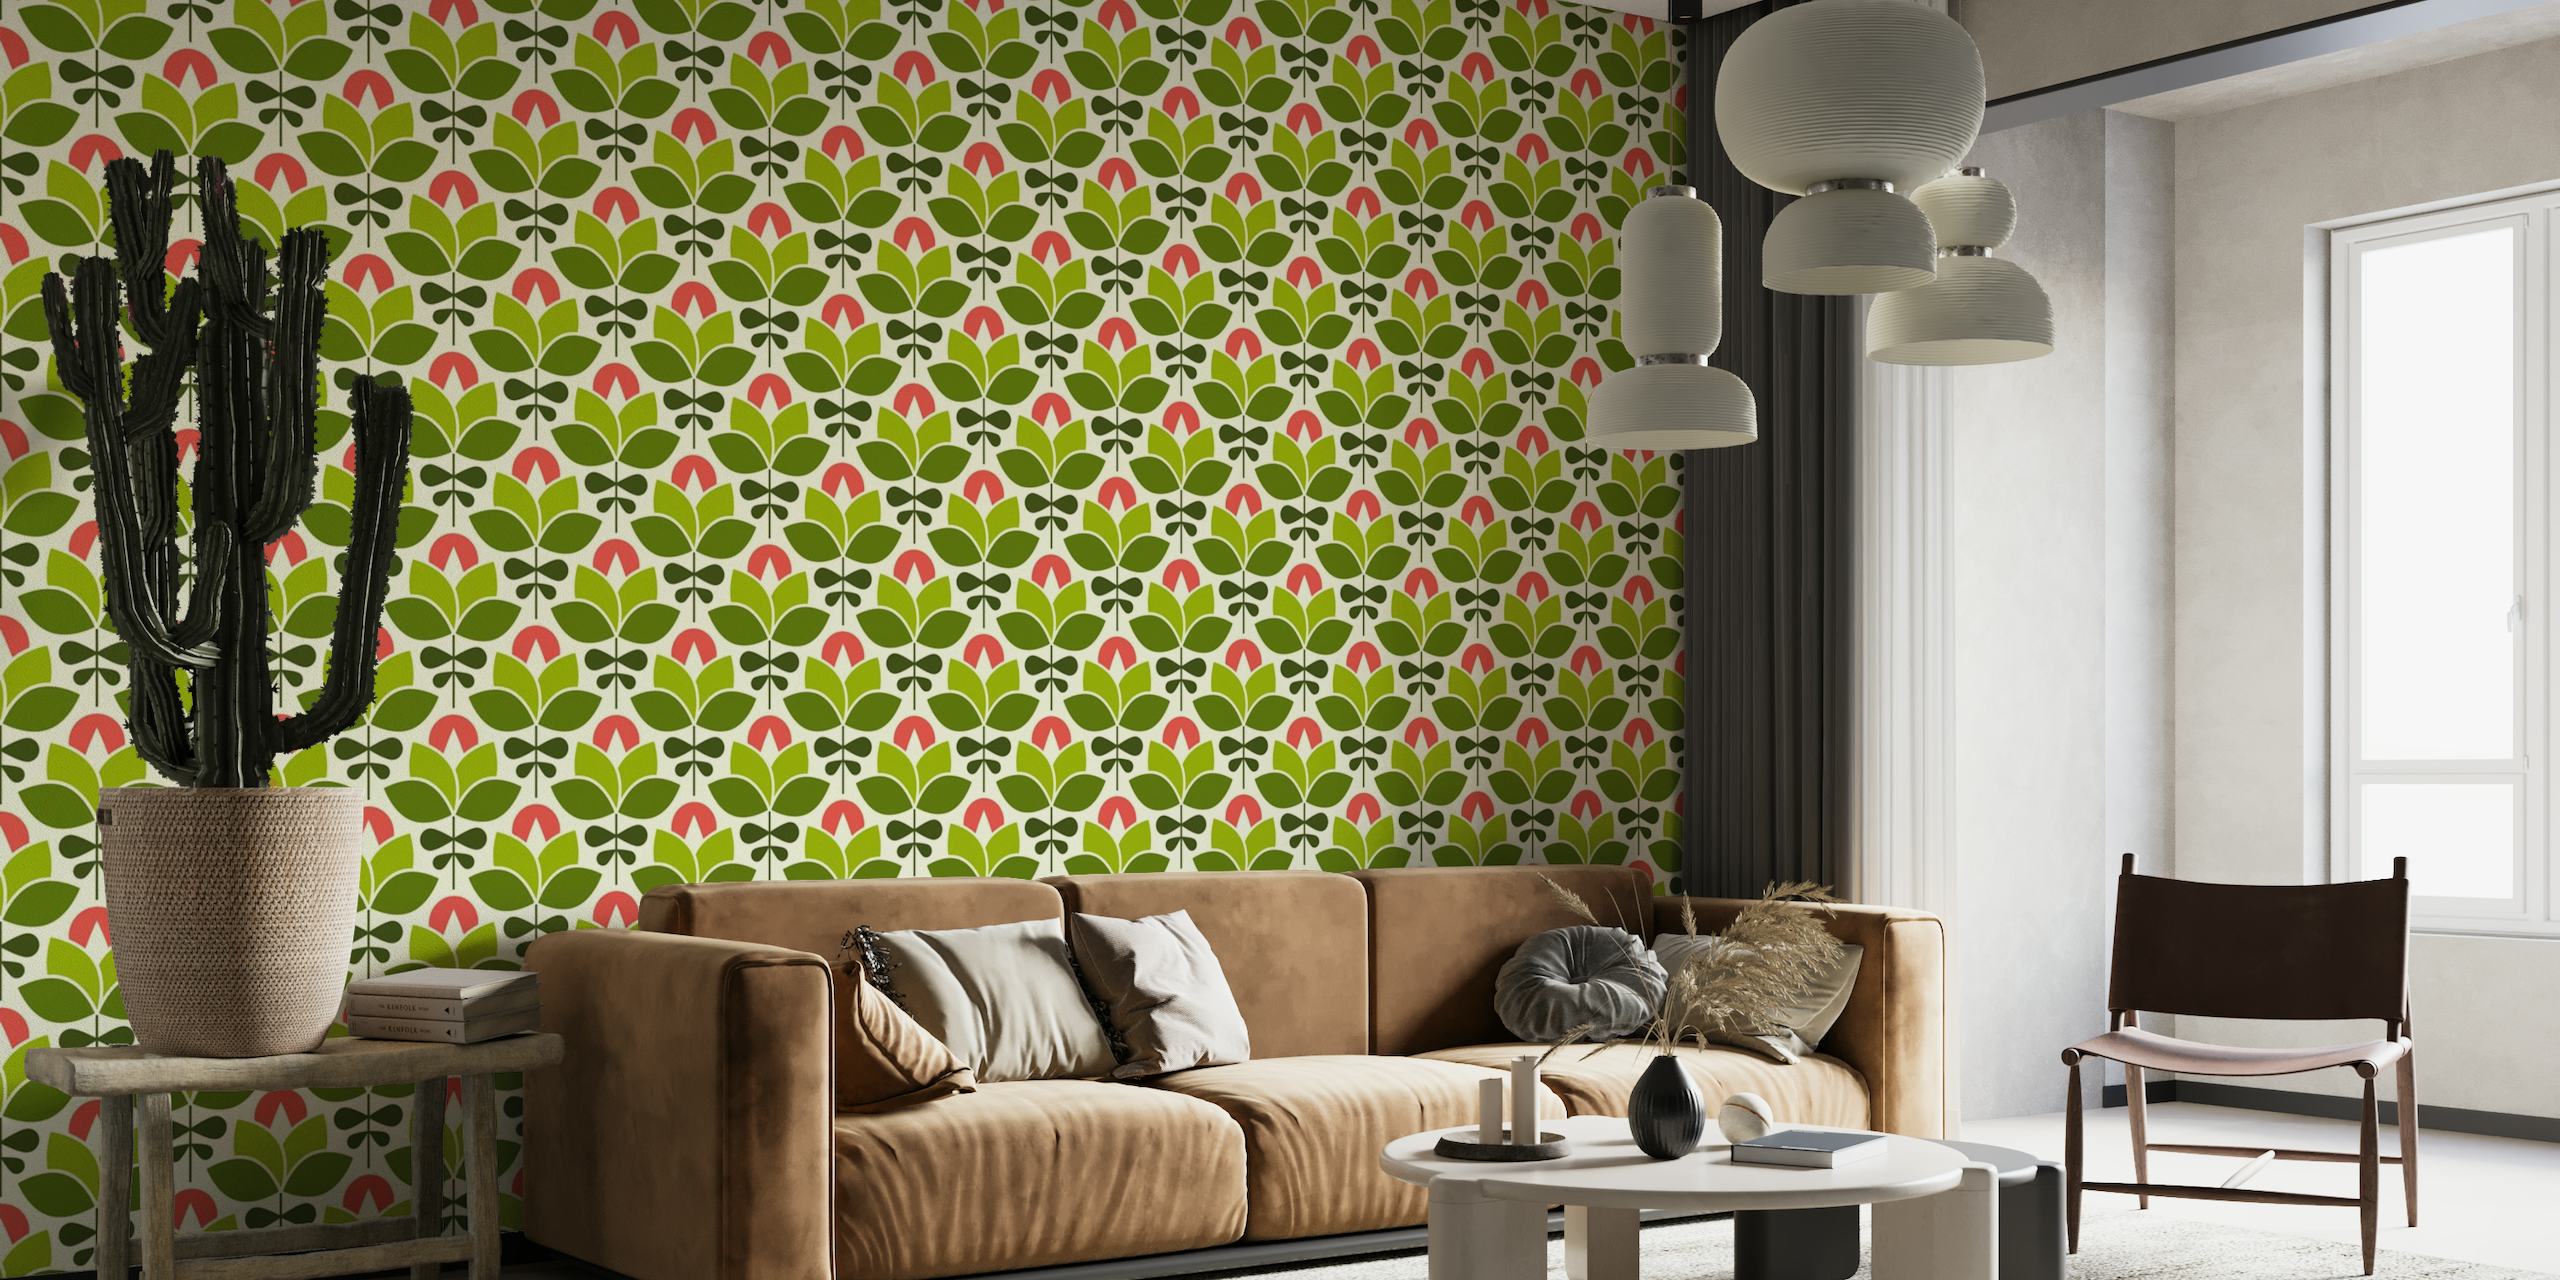 Modern Retro Flowers Wall Mural with Green and Red Design